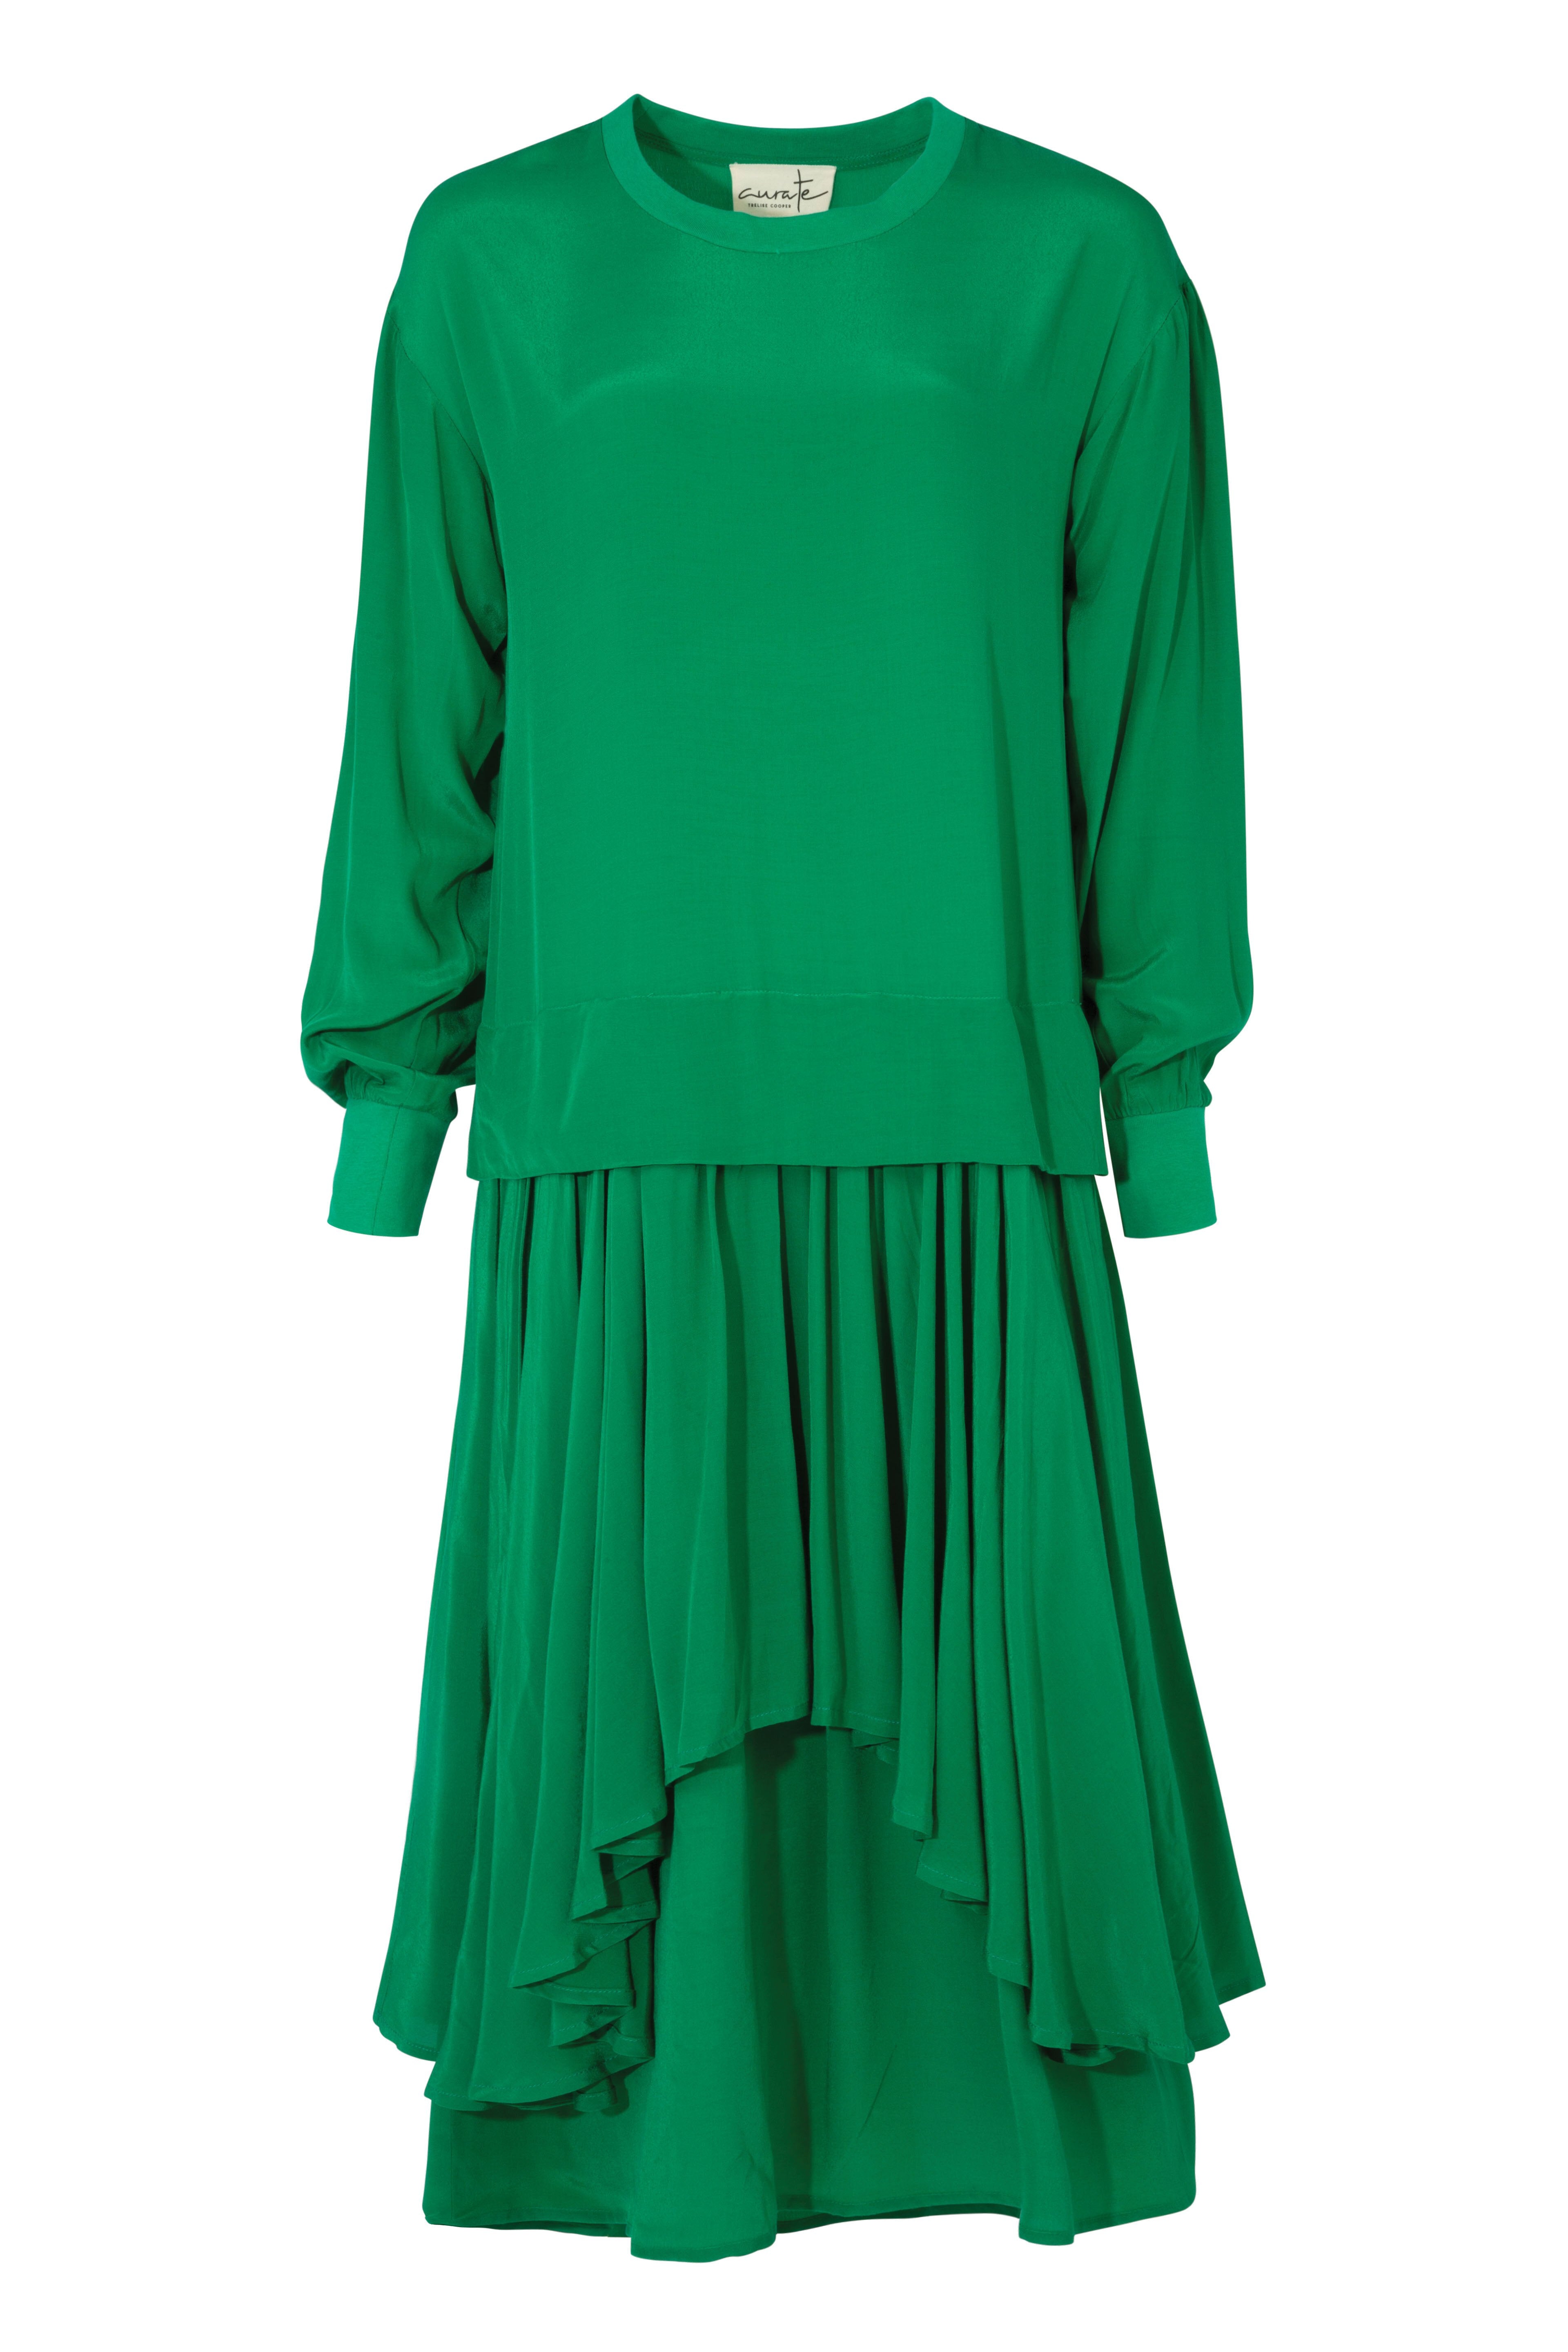 Curate All You Need Dress - Green